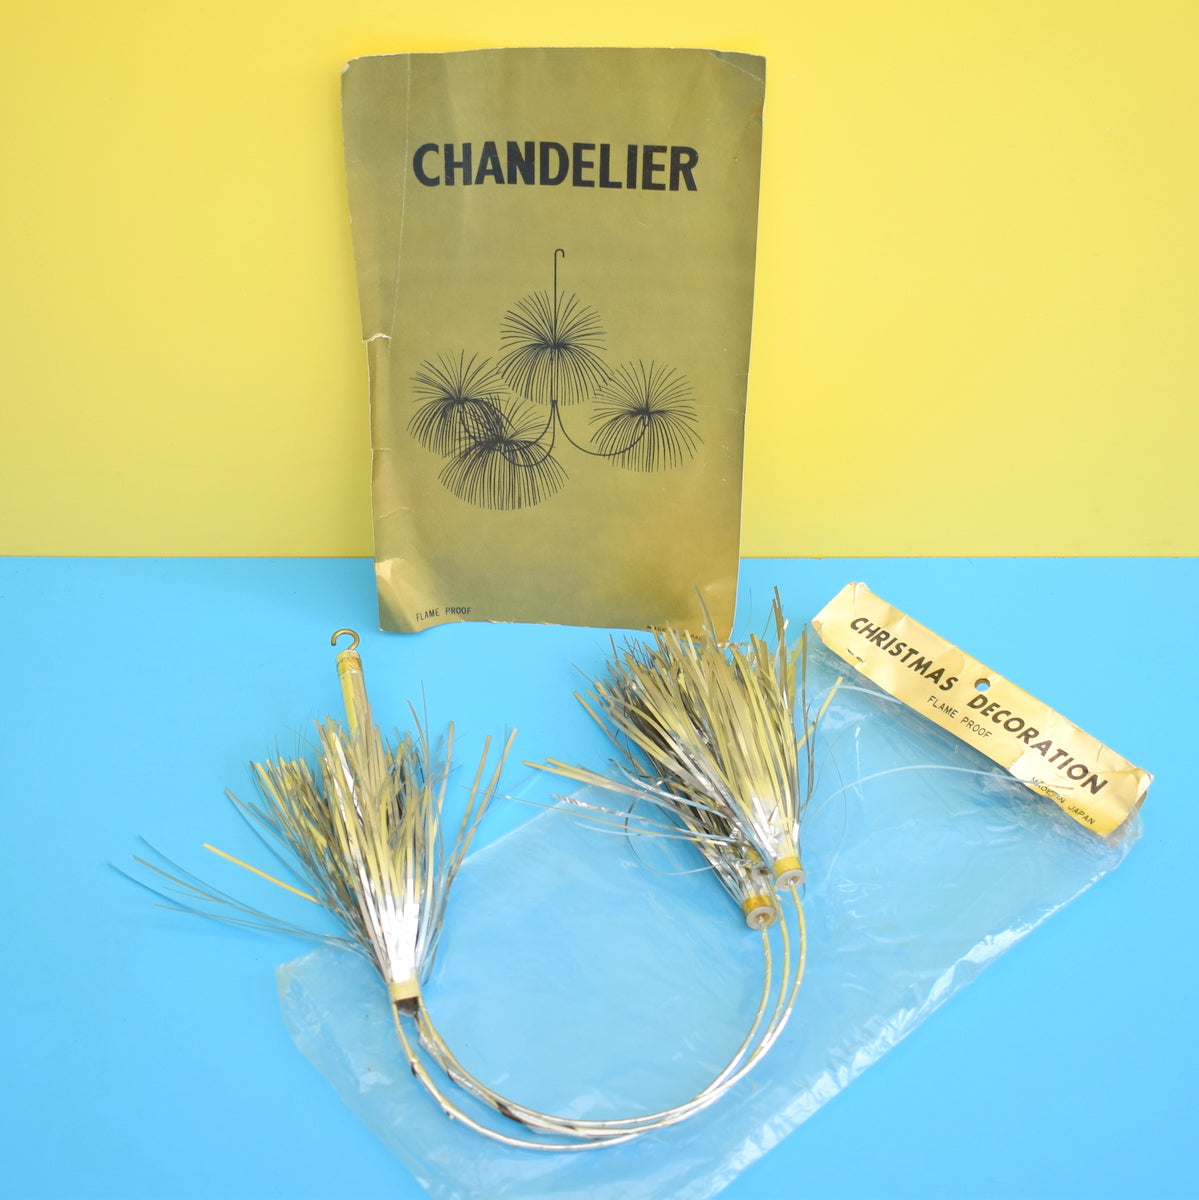 Vintage 1970s Christmas Tinsel Chandelier Mobile Decoration - In Packet